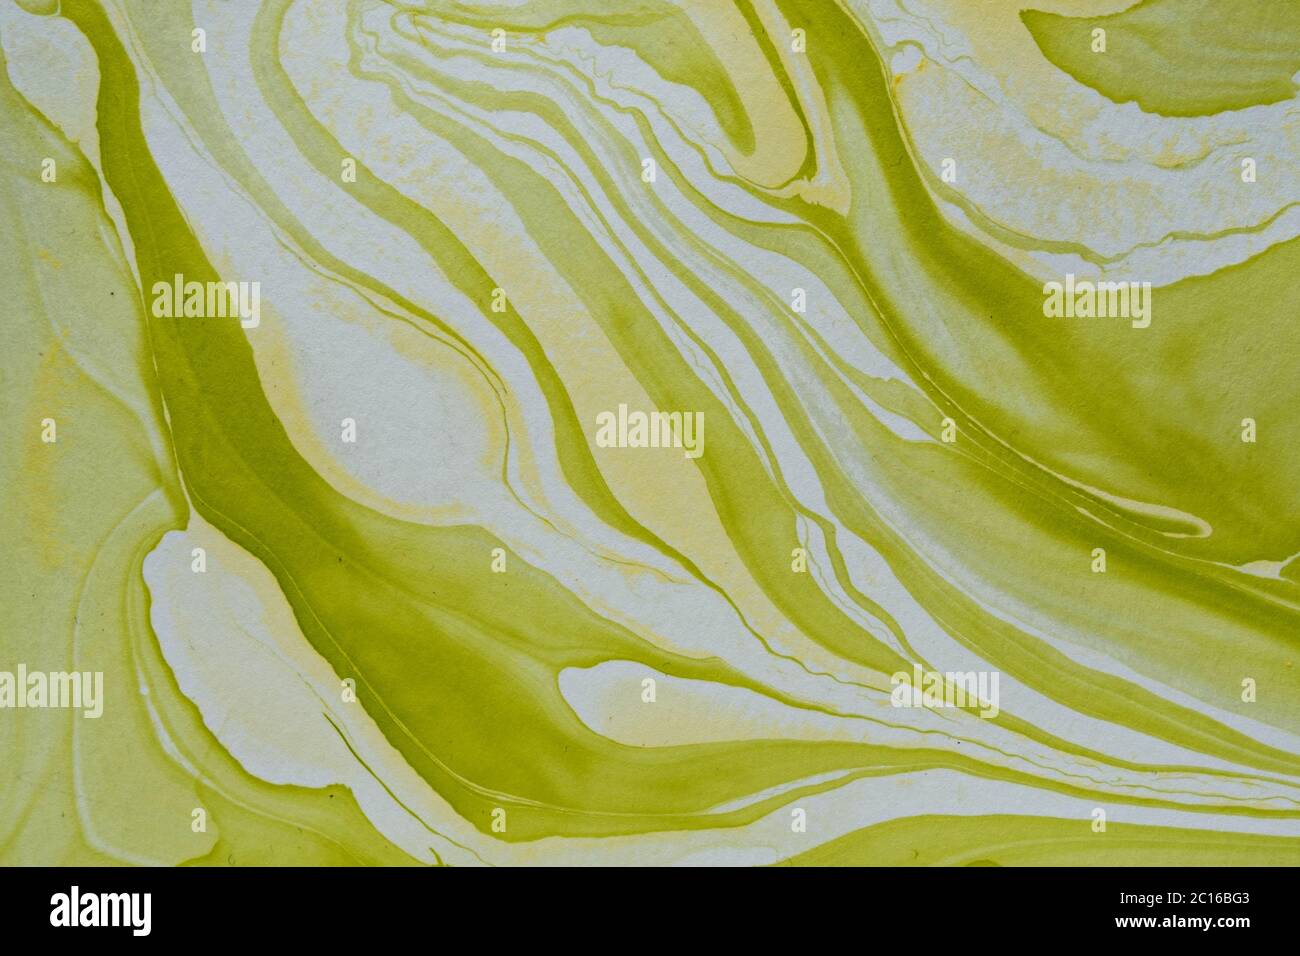 DIY monochrome marble effect abstract background with free flowing waves of green paint or pigment on white in full frame Stock Photo